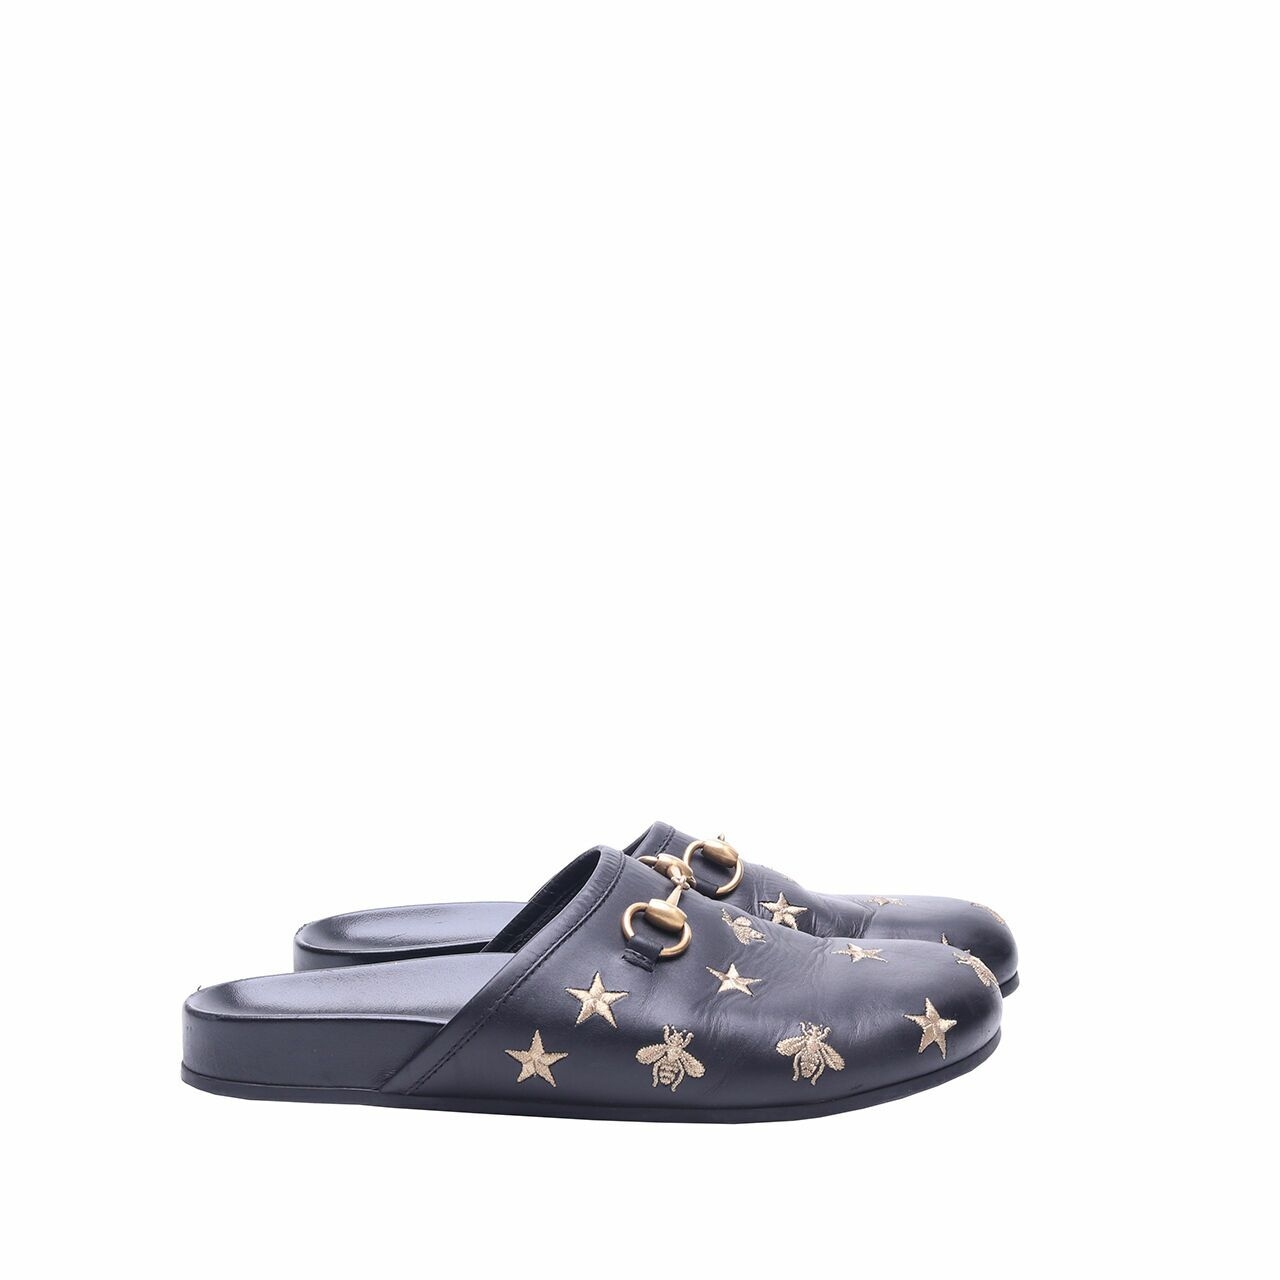 Gucci Horsebit Leather Bee and Star Black Sandals 